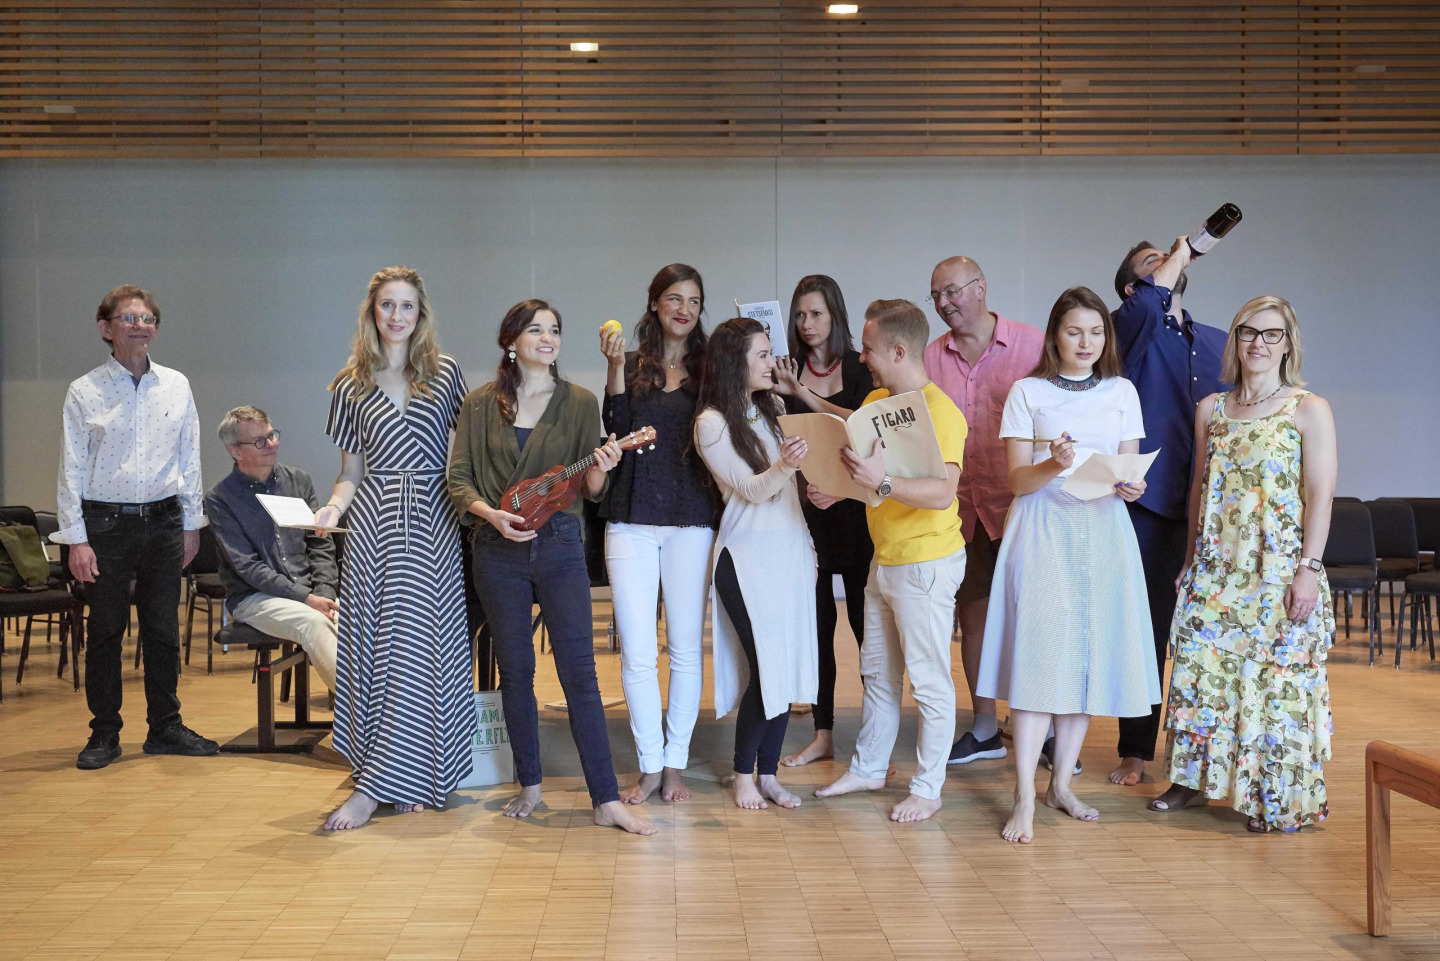 UASP Institute - 'Artists In Performance' - Royal Conservatory, Toronto - August 2019